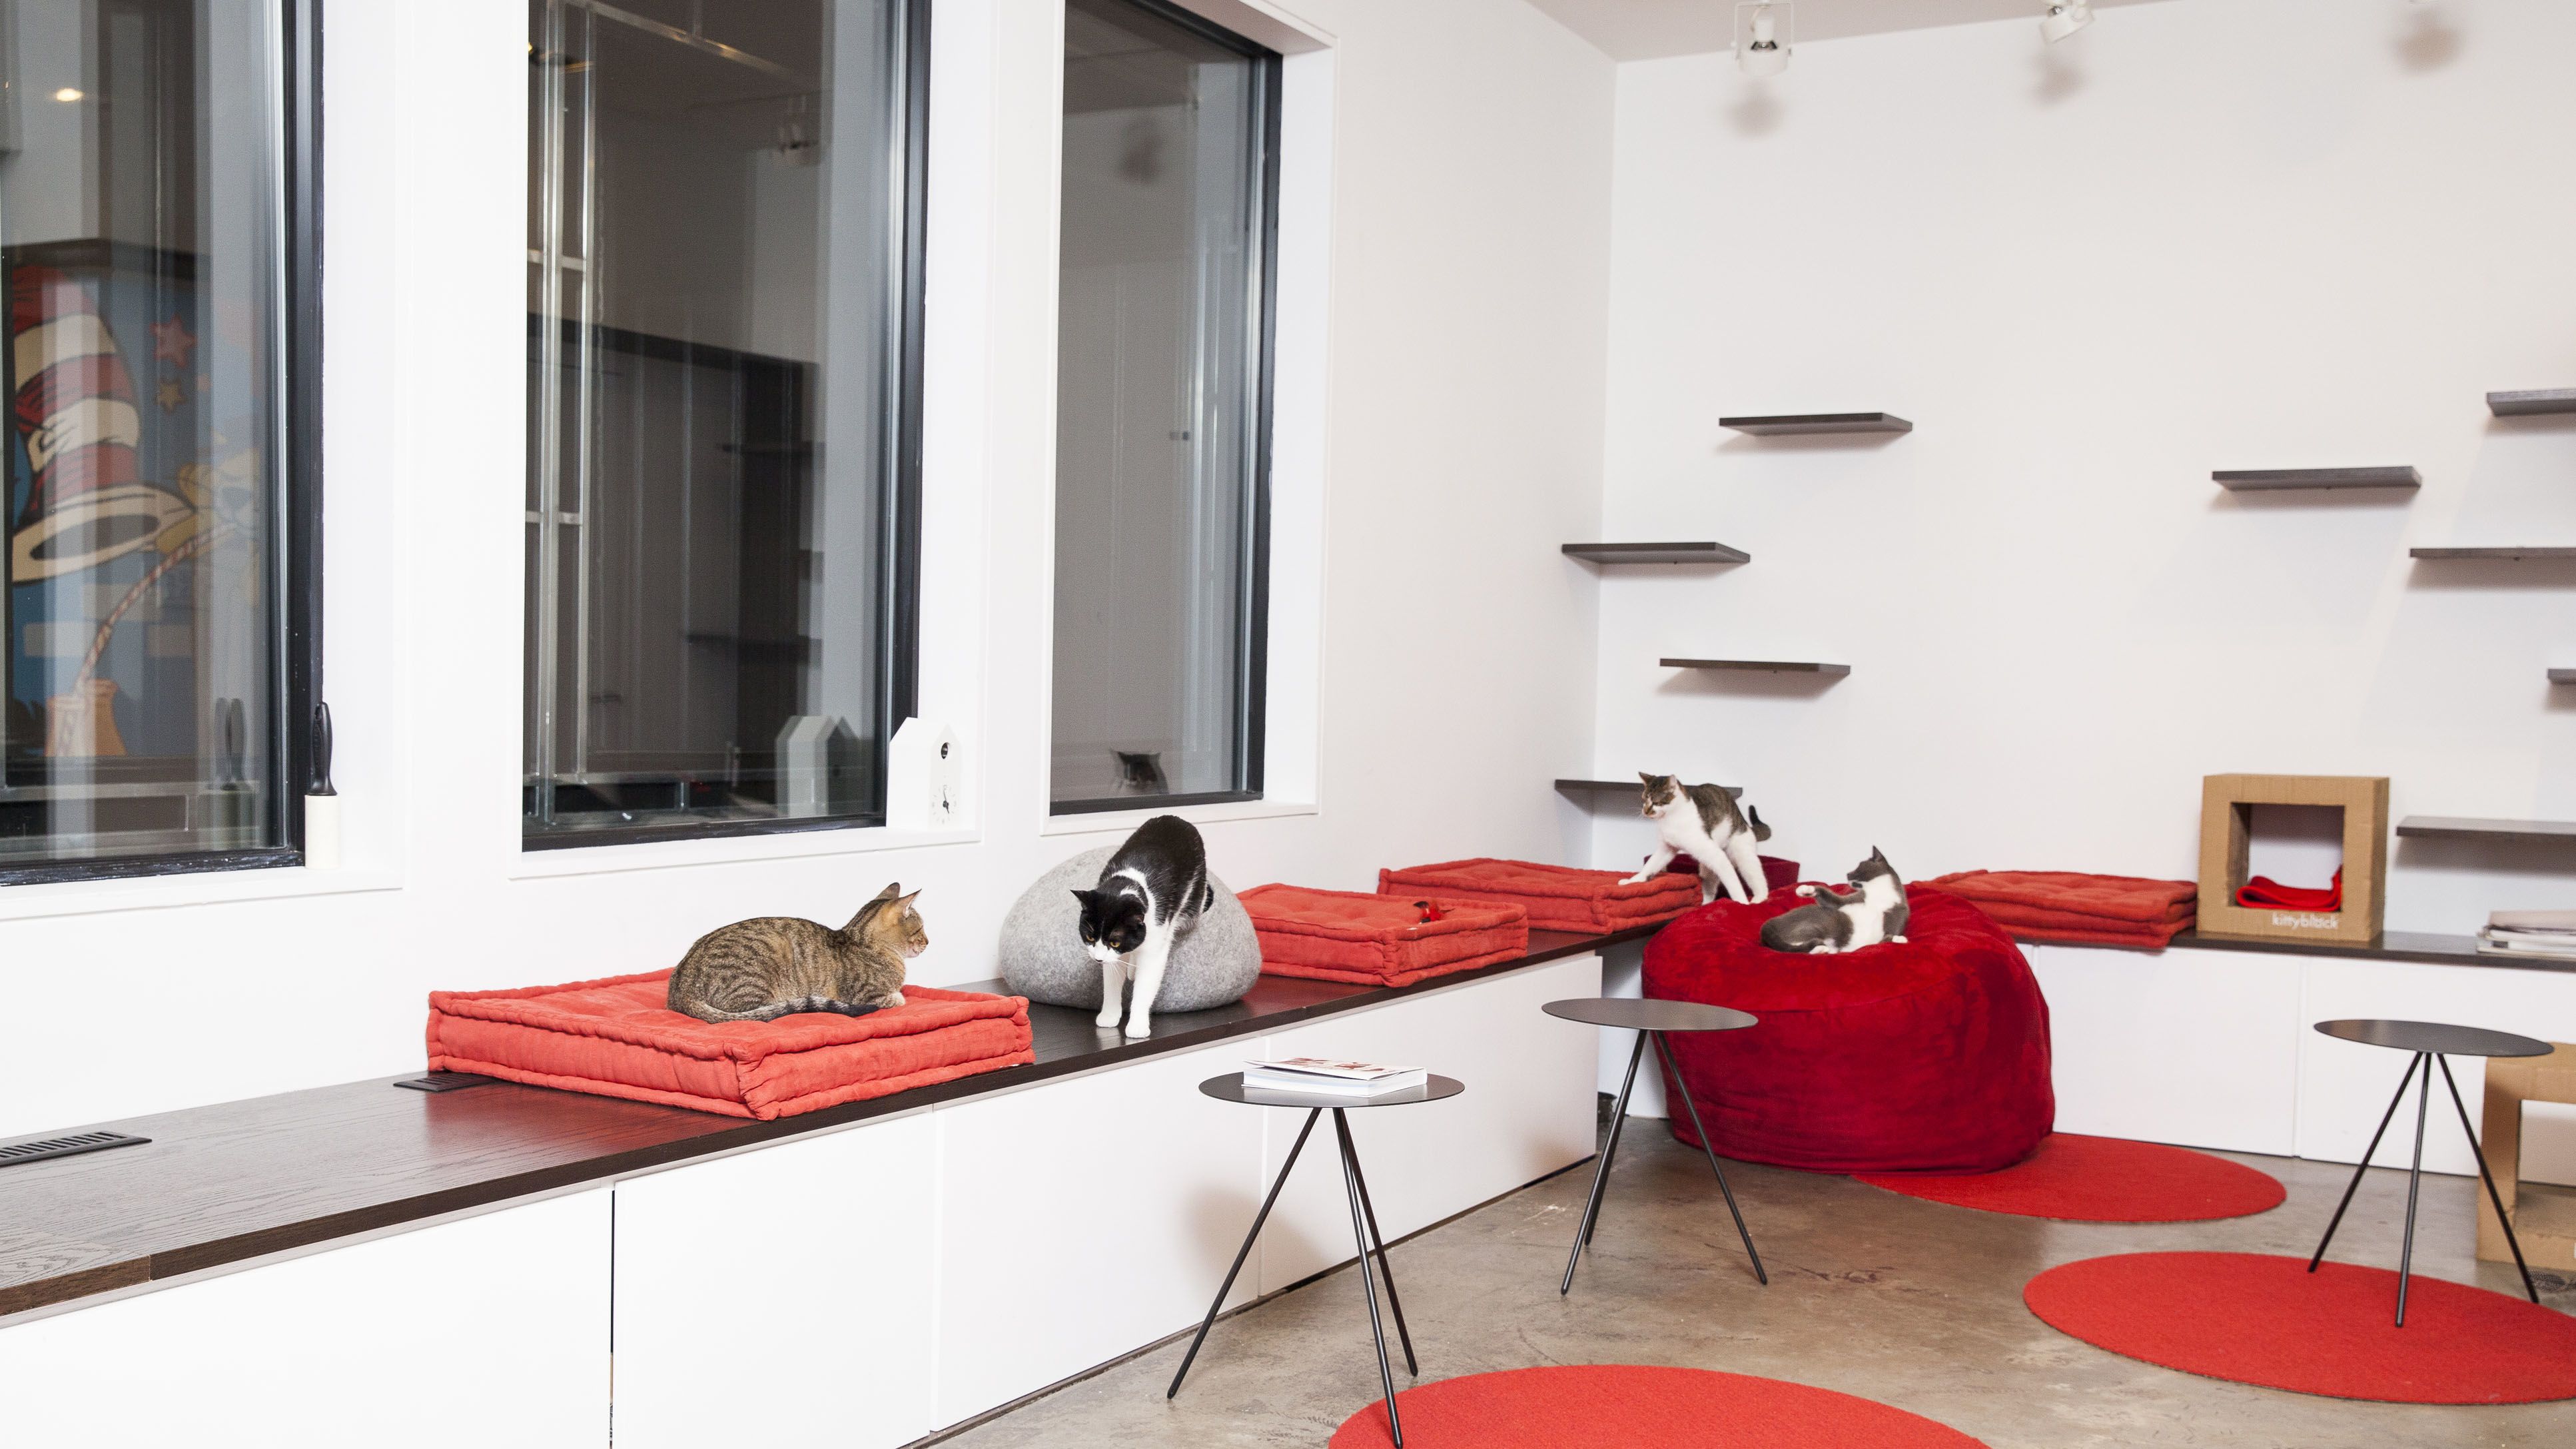 FELINE GOOD CAT CAFE: All You Need to Know BEFORE You Go (with Photos)